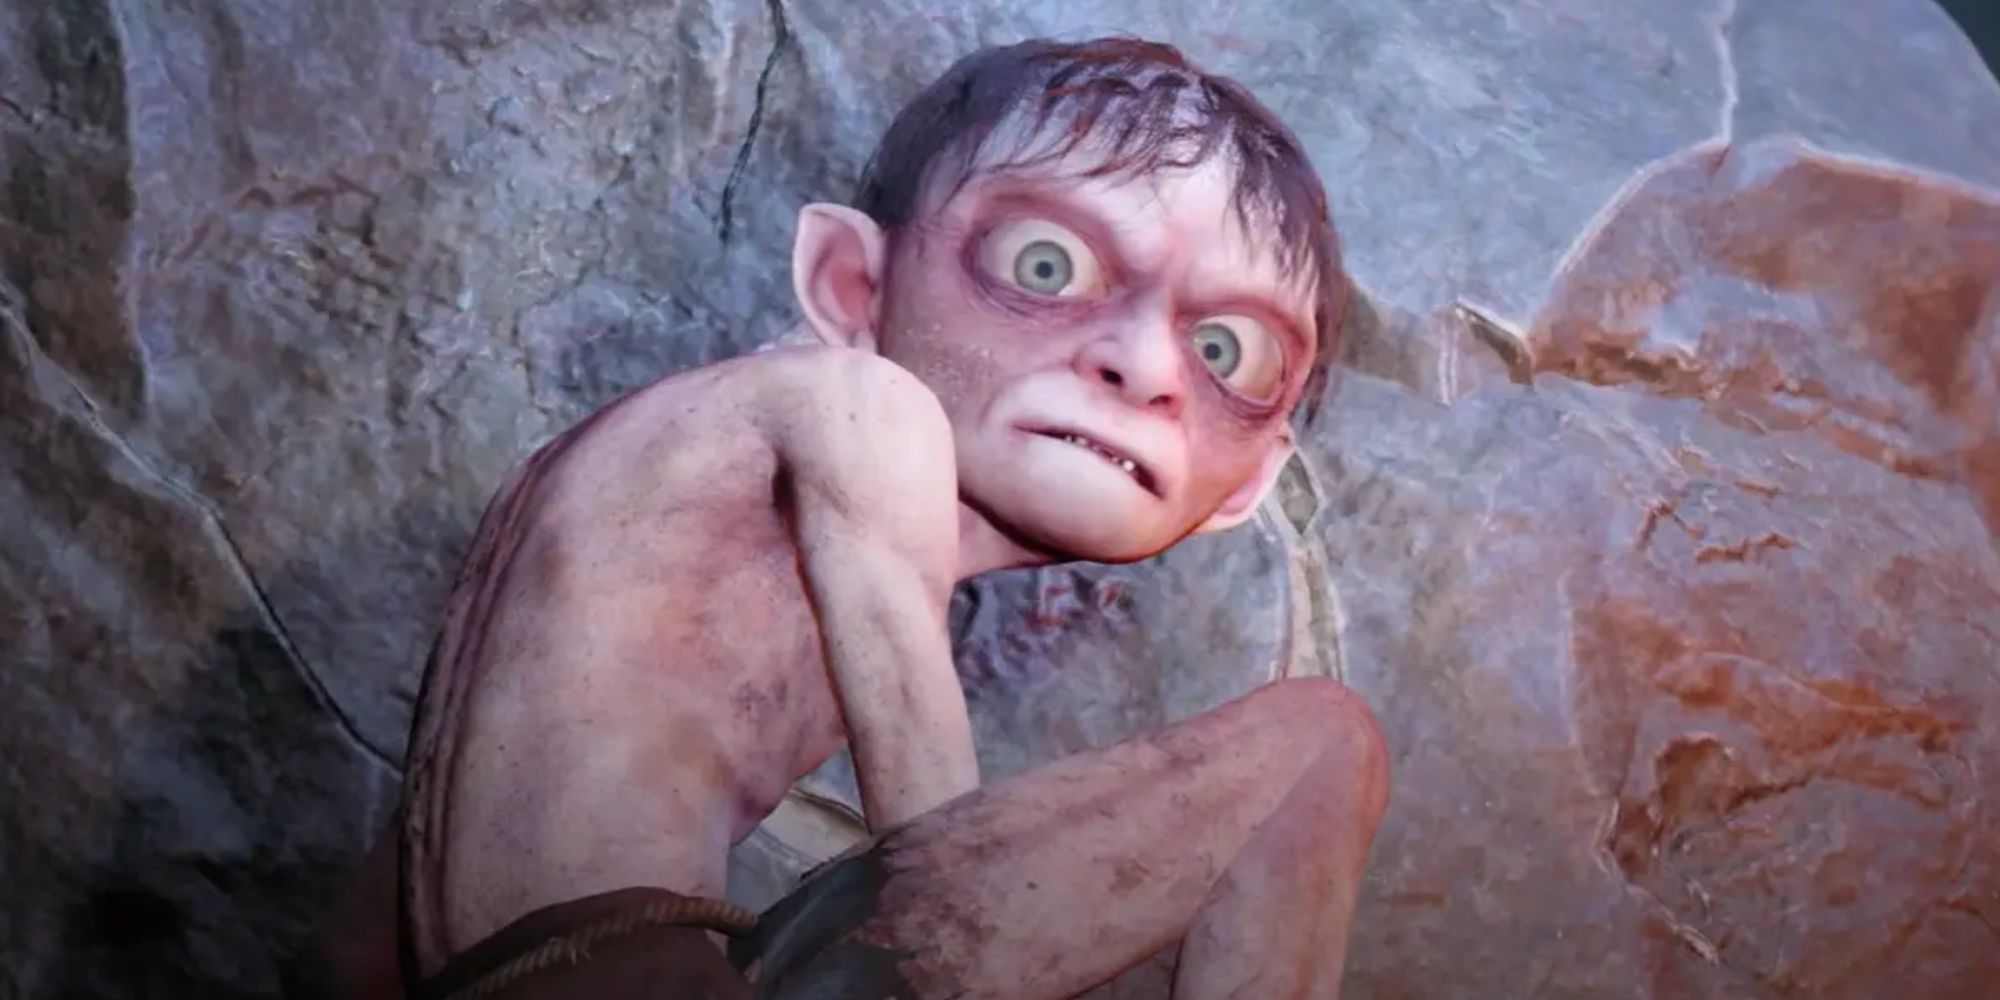 lord of the rings gollum